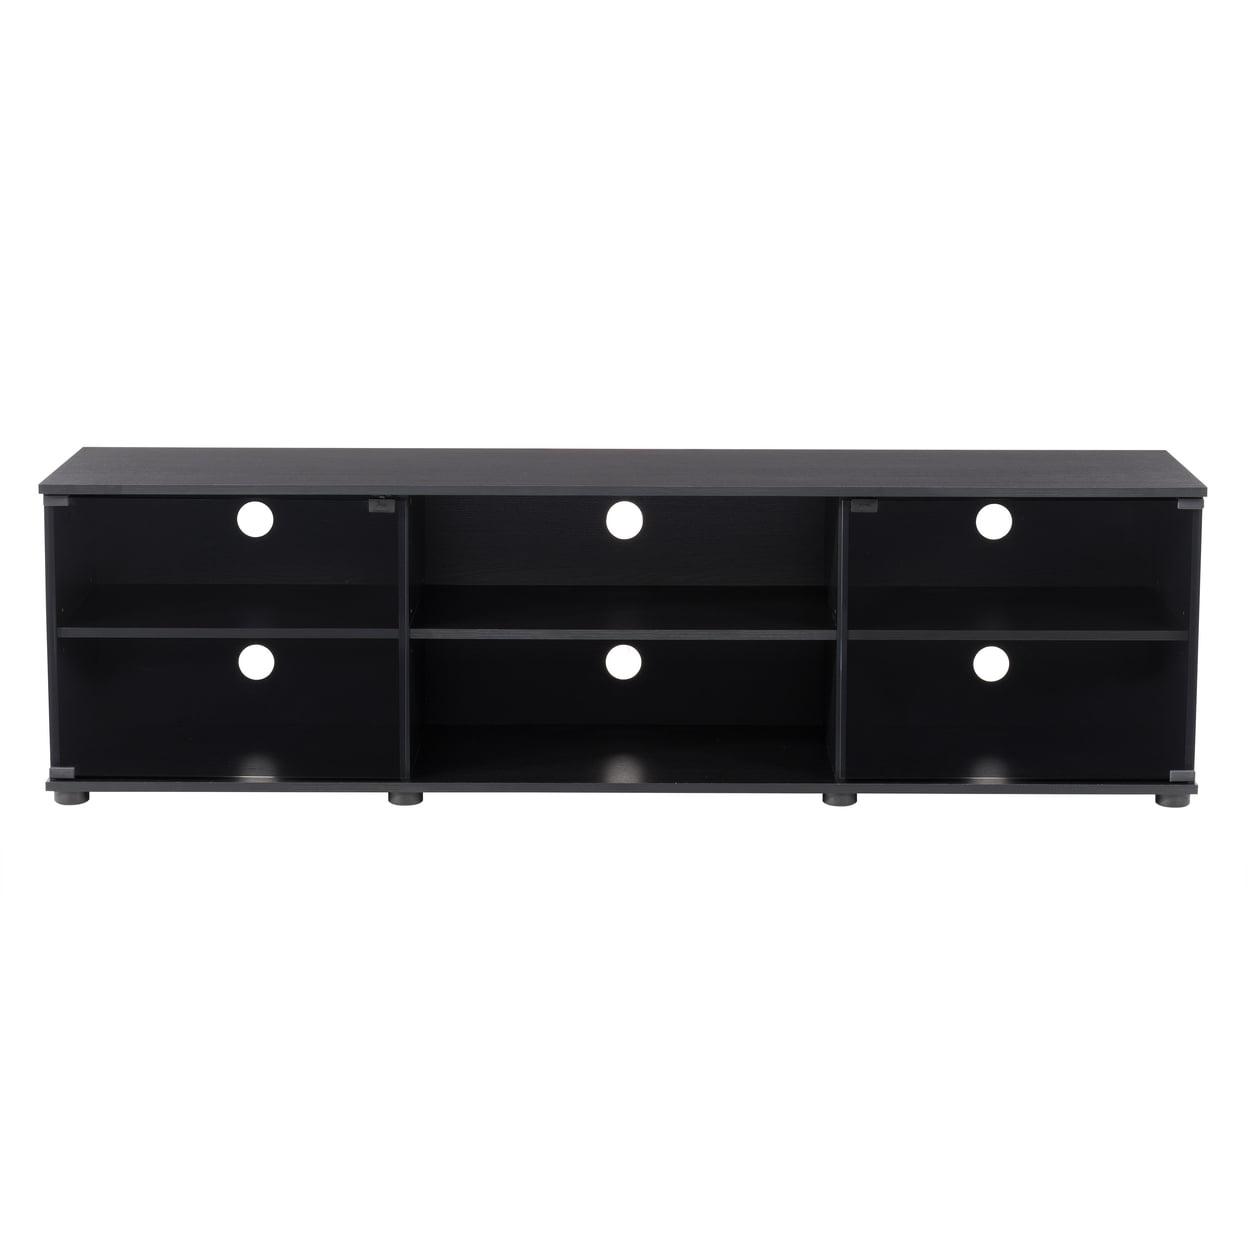 Ravenwood Black 74" Engineered Wood TV Stand with Glass Cabinet